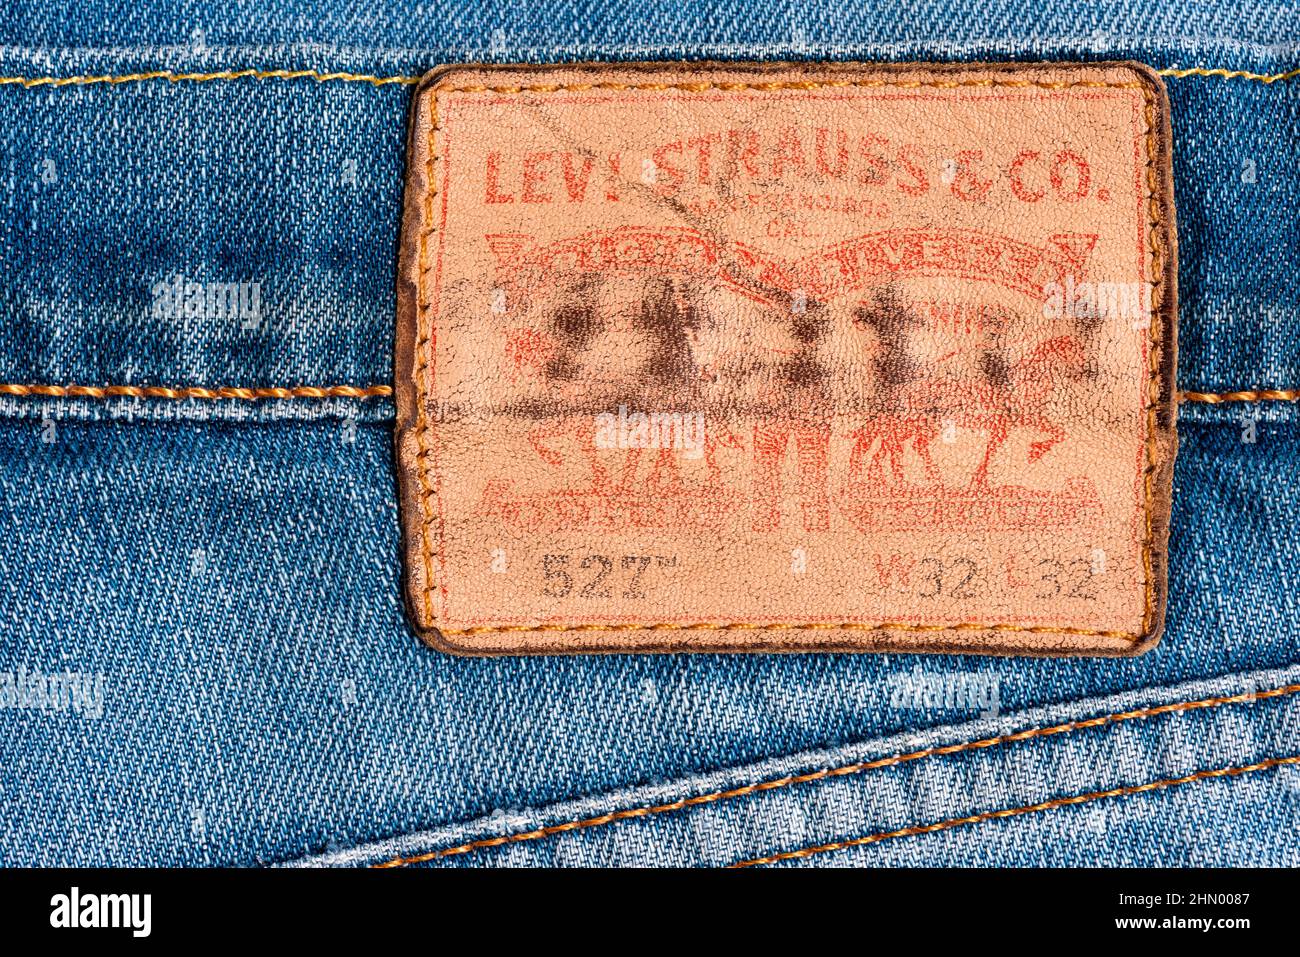 Levi Strauss & Co. emblem on classic 527 boot cut blue jeans Stock Photo